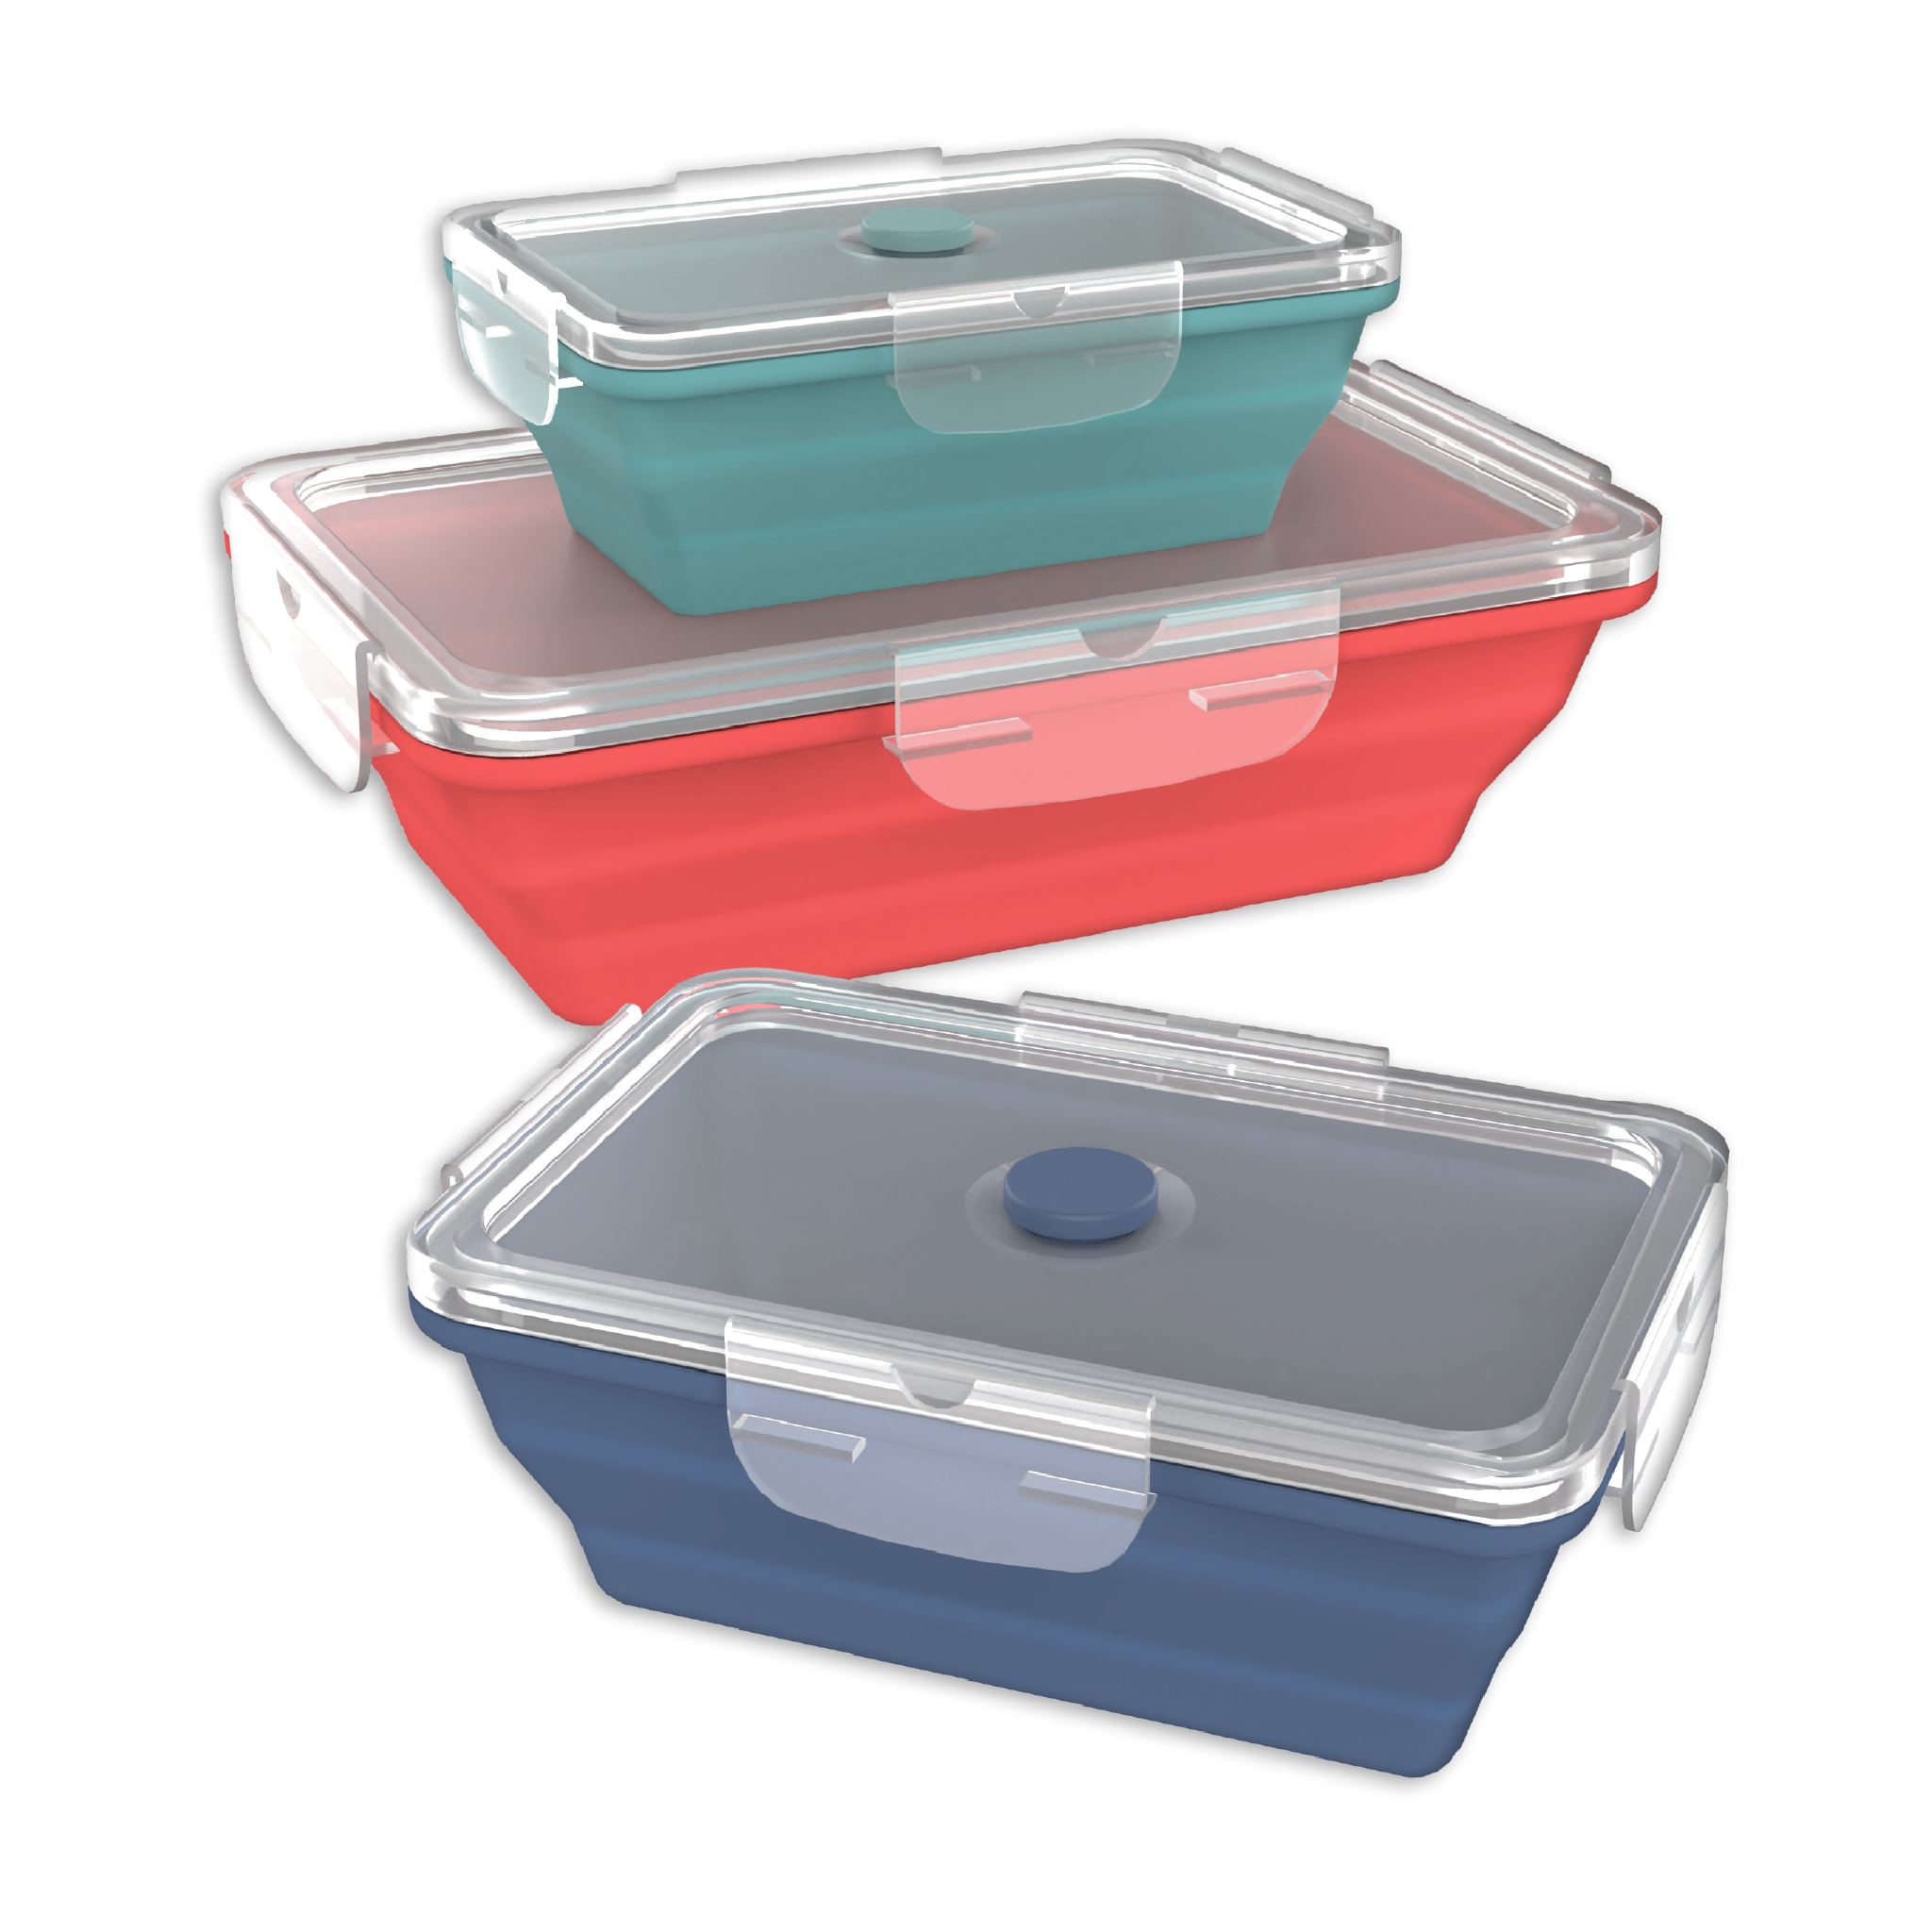 Collapsible food storage containers - We Are Global Travellers